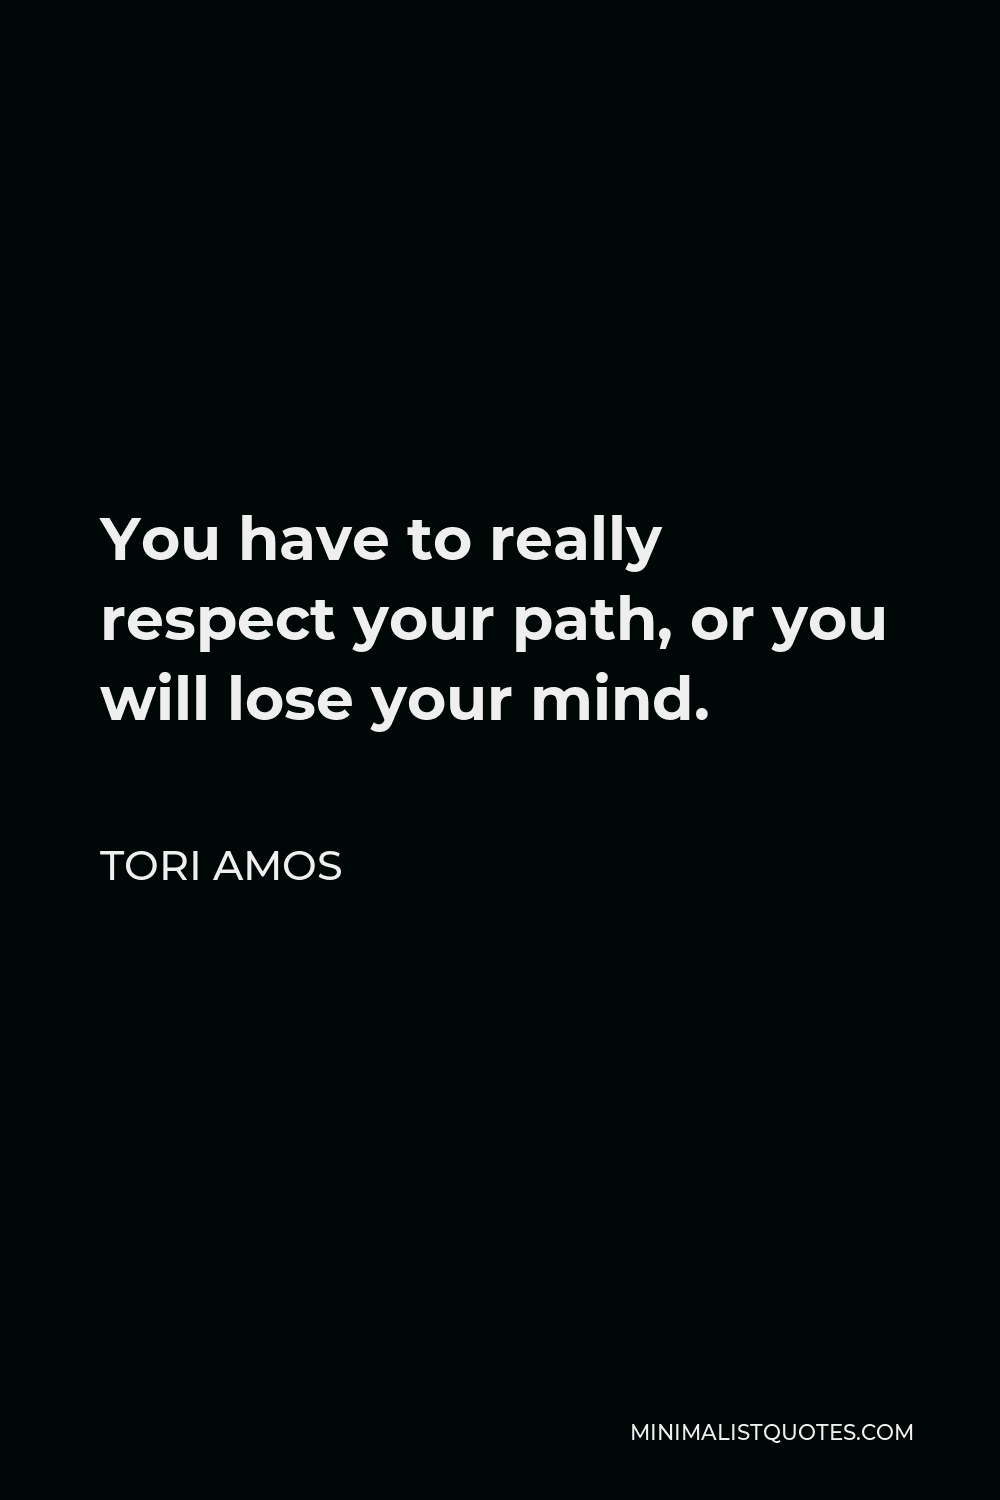 Tori Amos Quote - You have to really respect your path, or you will lose your mind.